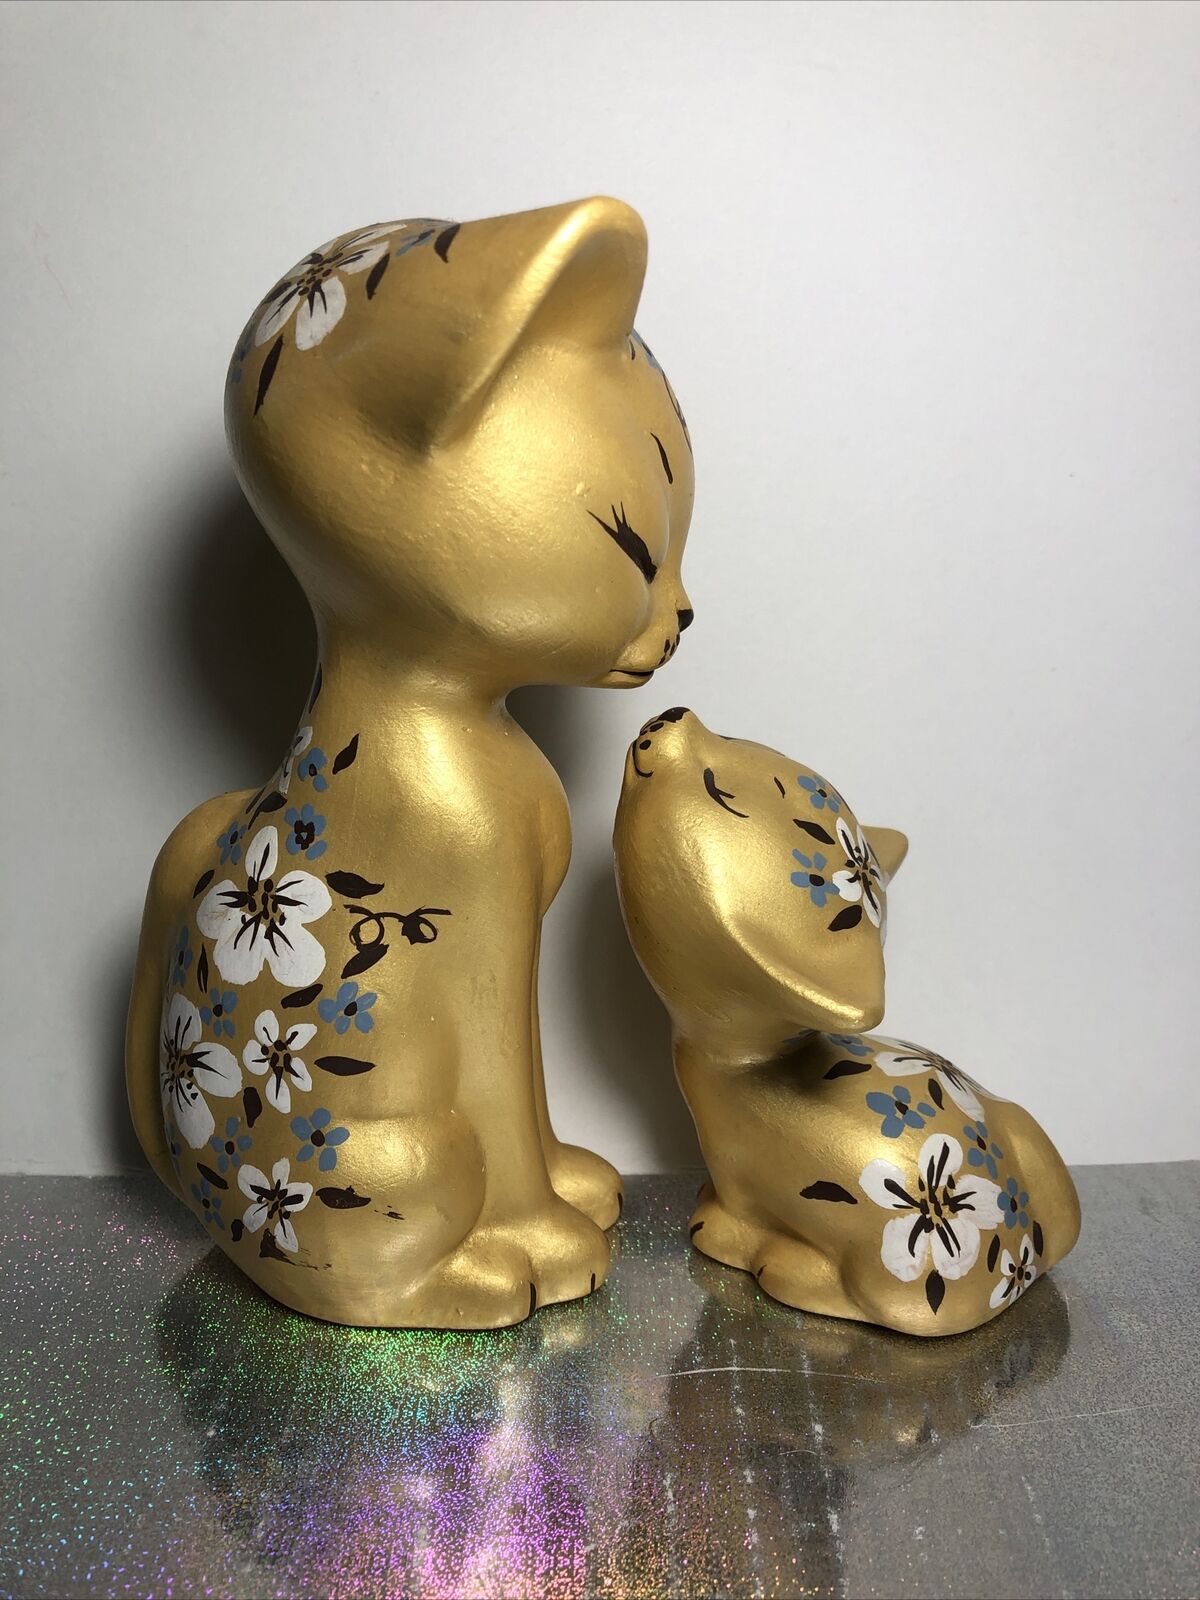 Mcnees Porcelain Momma Cat And Her Kitten Gold White And Blue Floral Painted